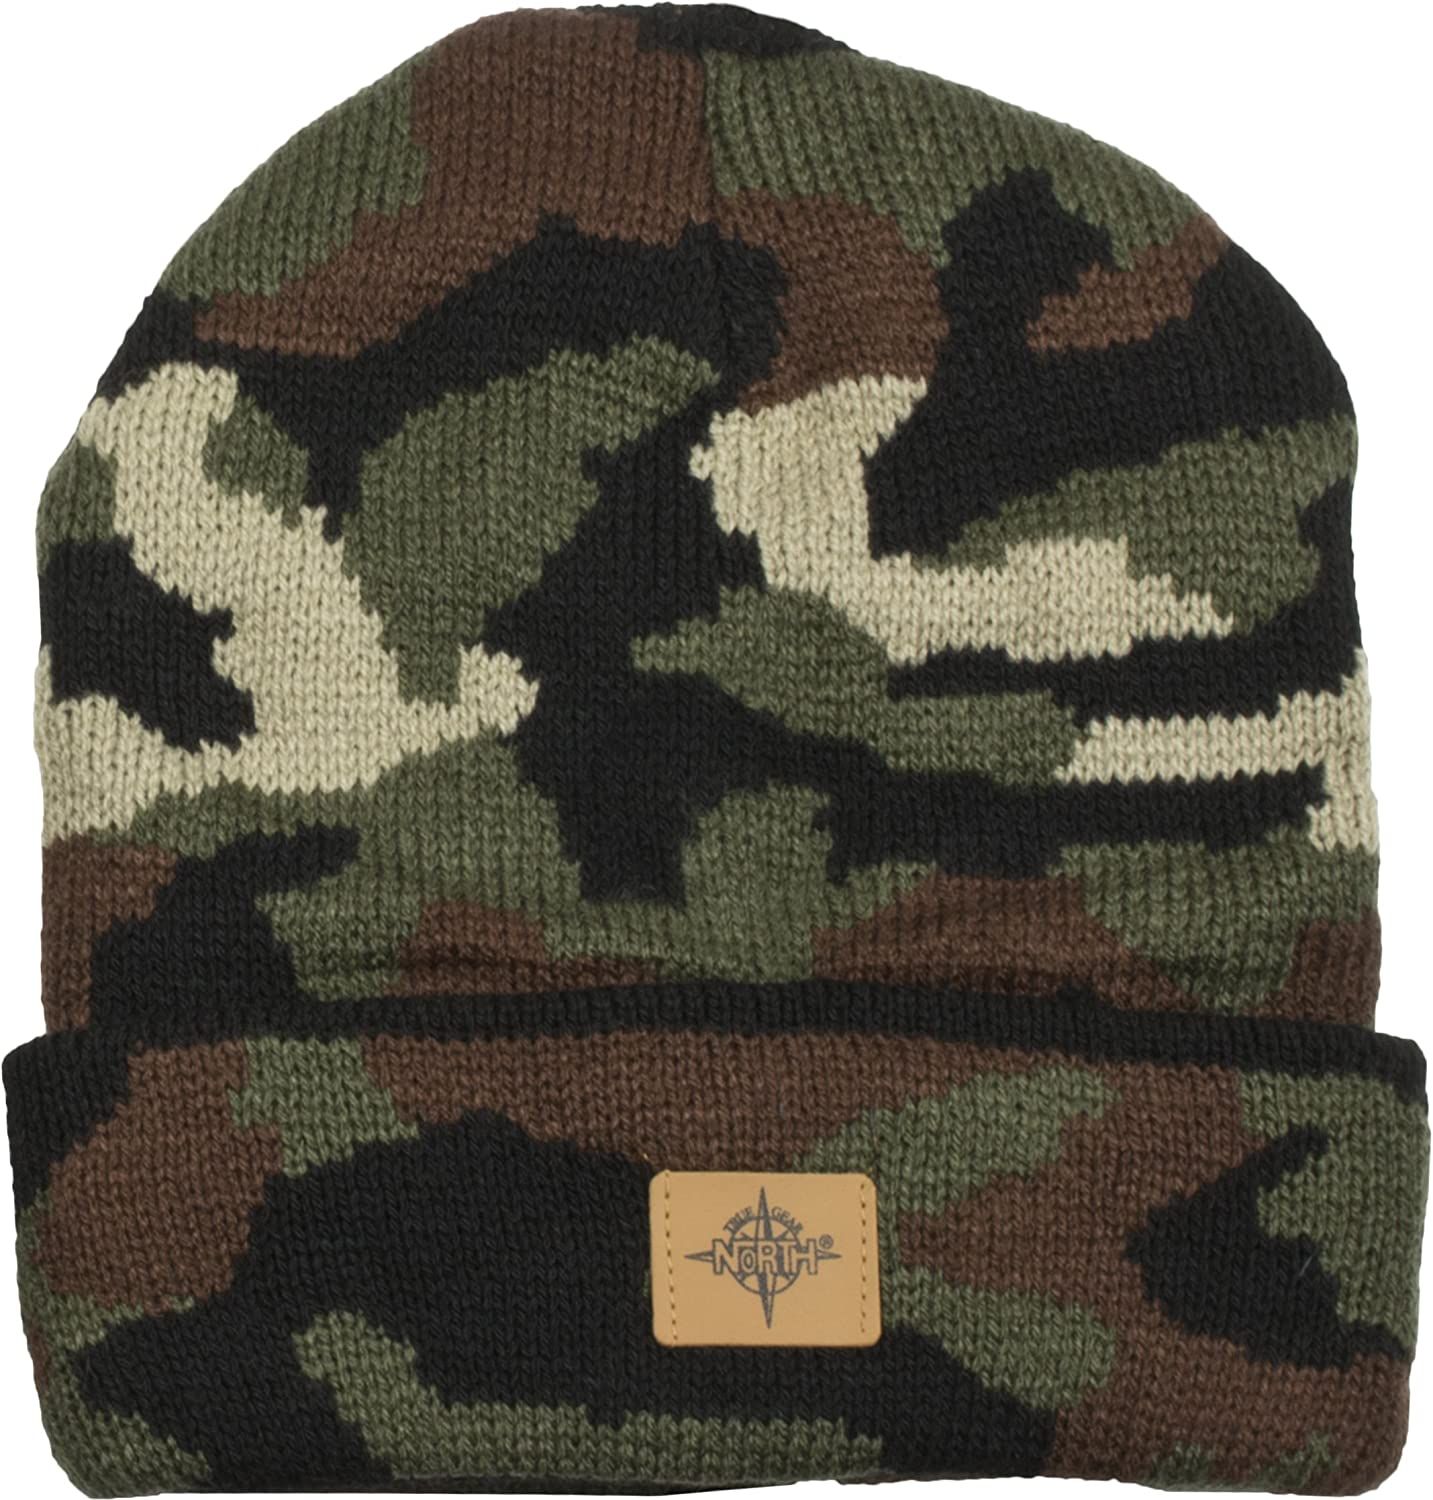 TRUE GEAR NORTH 6-186 Lined Camouflage Beanie at Sutherlands